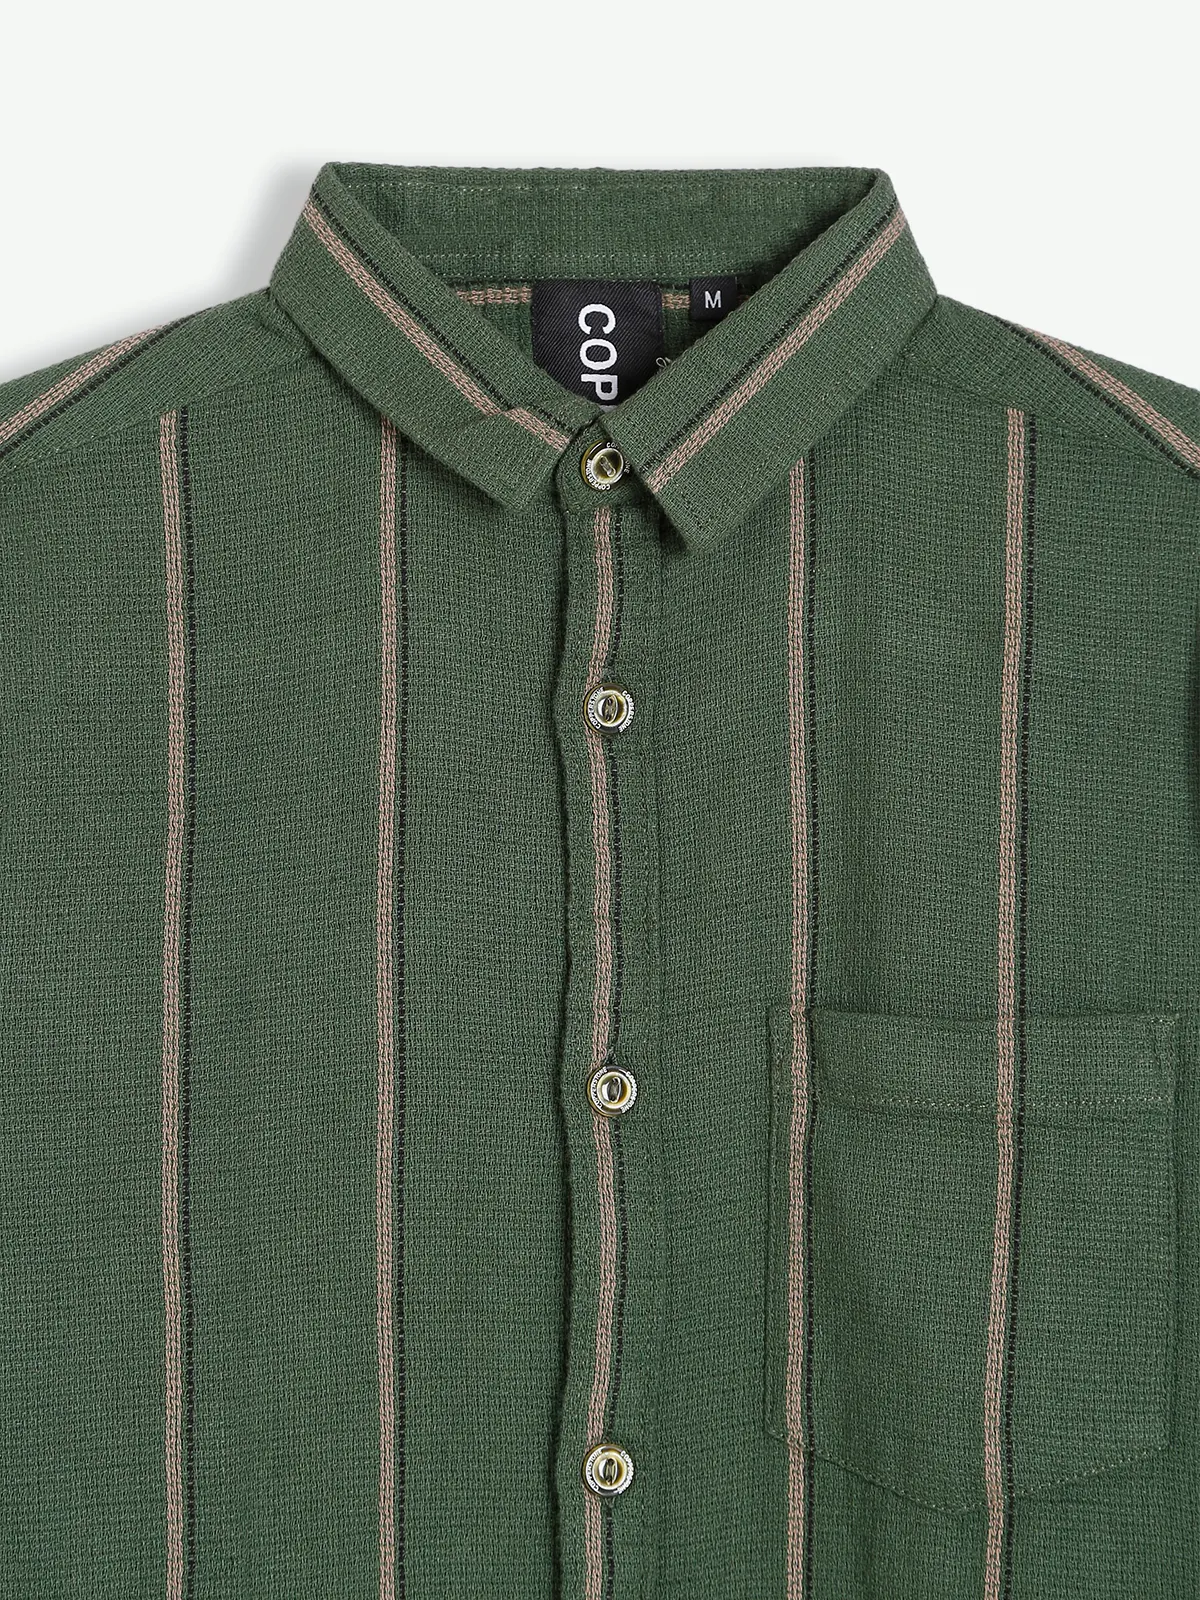 Copperstone knitted stripe shirt in sage green